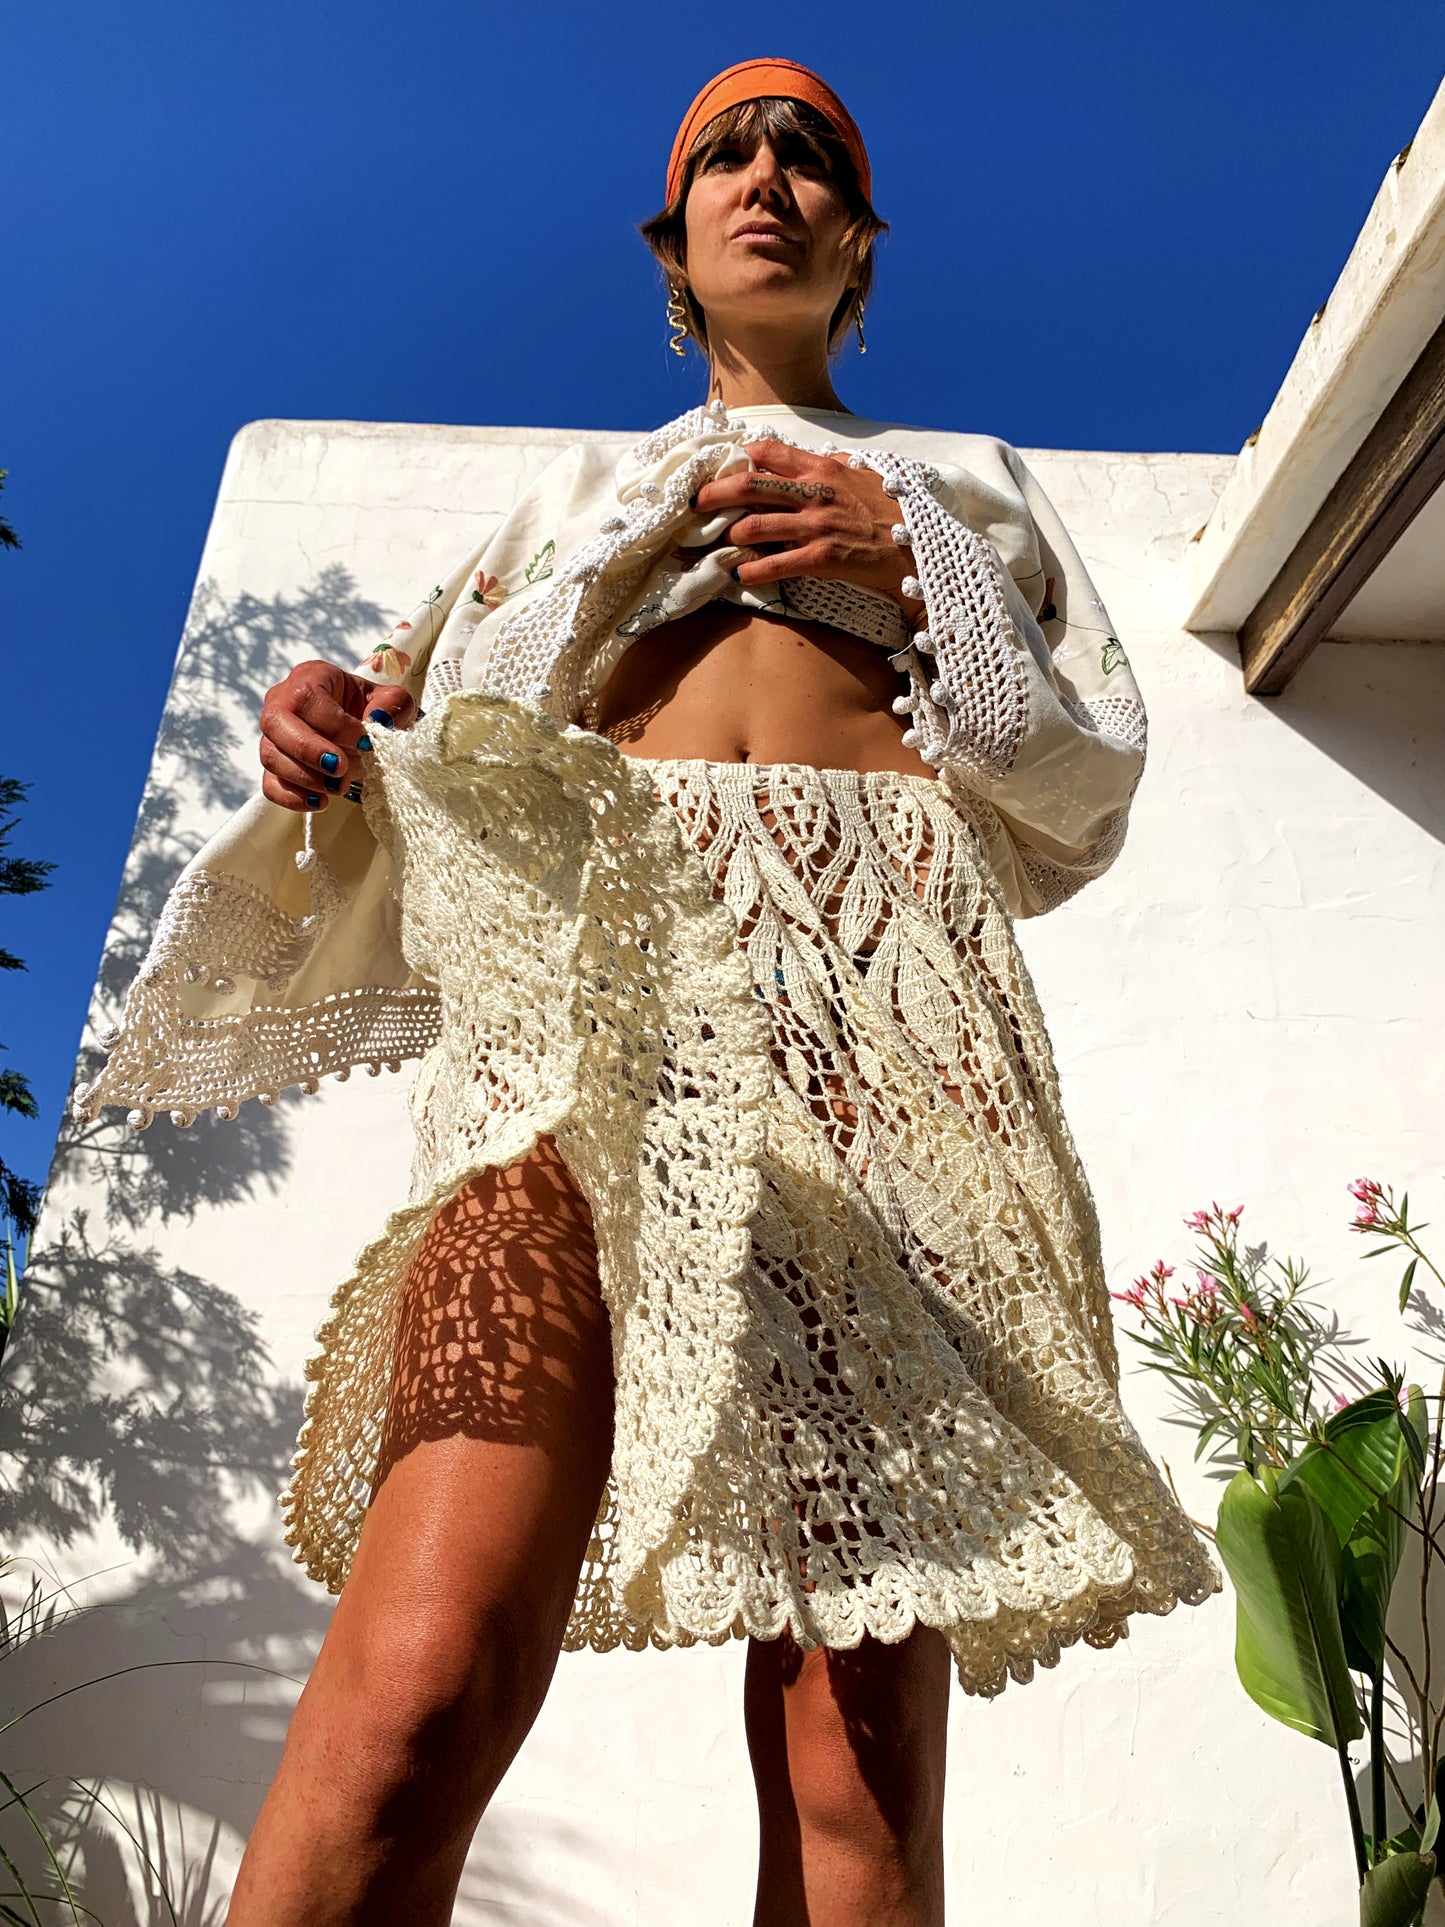 Antique Lace up-cycled skirt made in Ibiza by Vagabond Ibiza